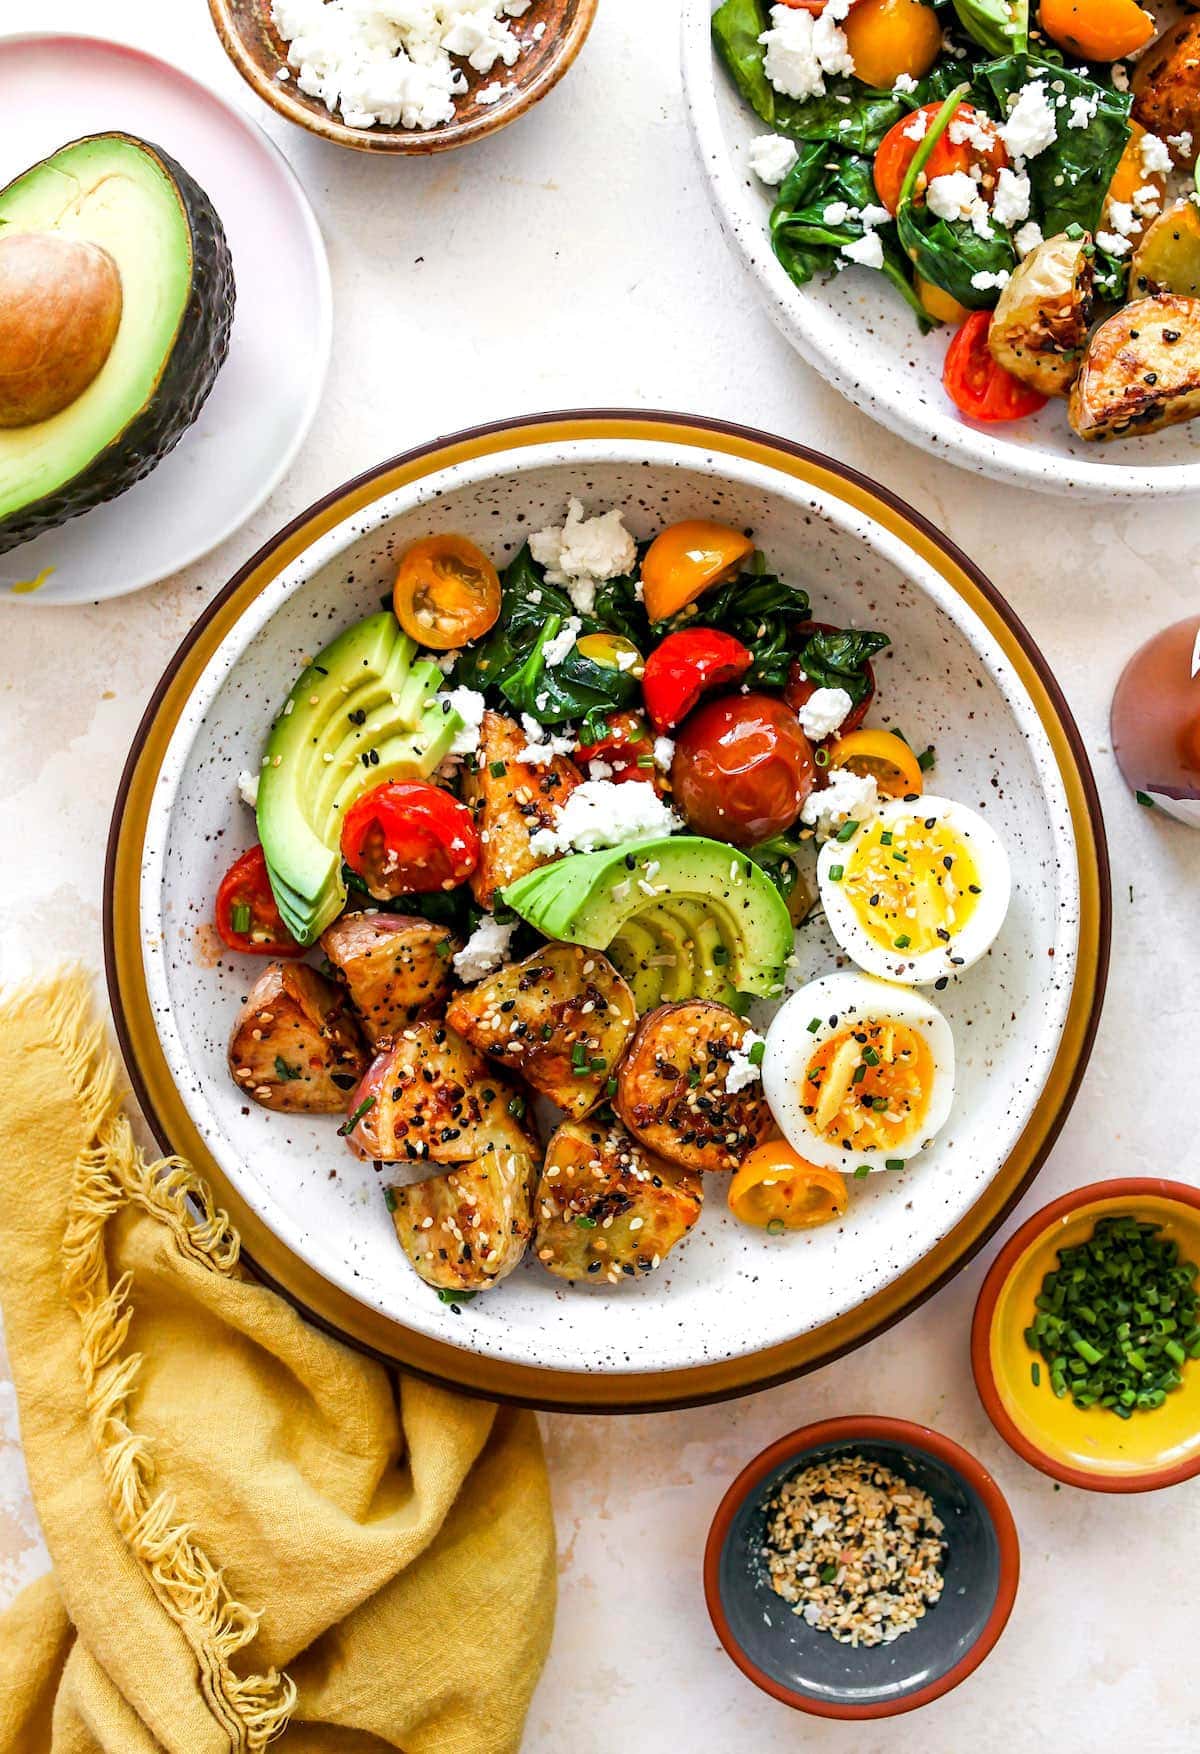 Healthy Savory Breakfast Bowl with eggs, potatoes, avocado, tomatoes, spinach, and cheese. 